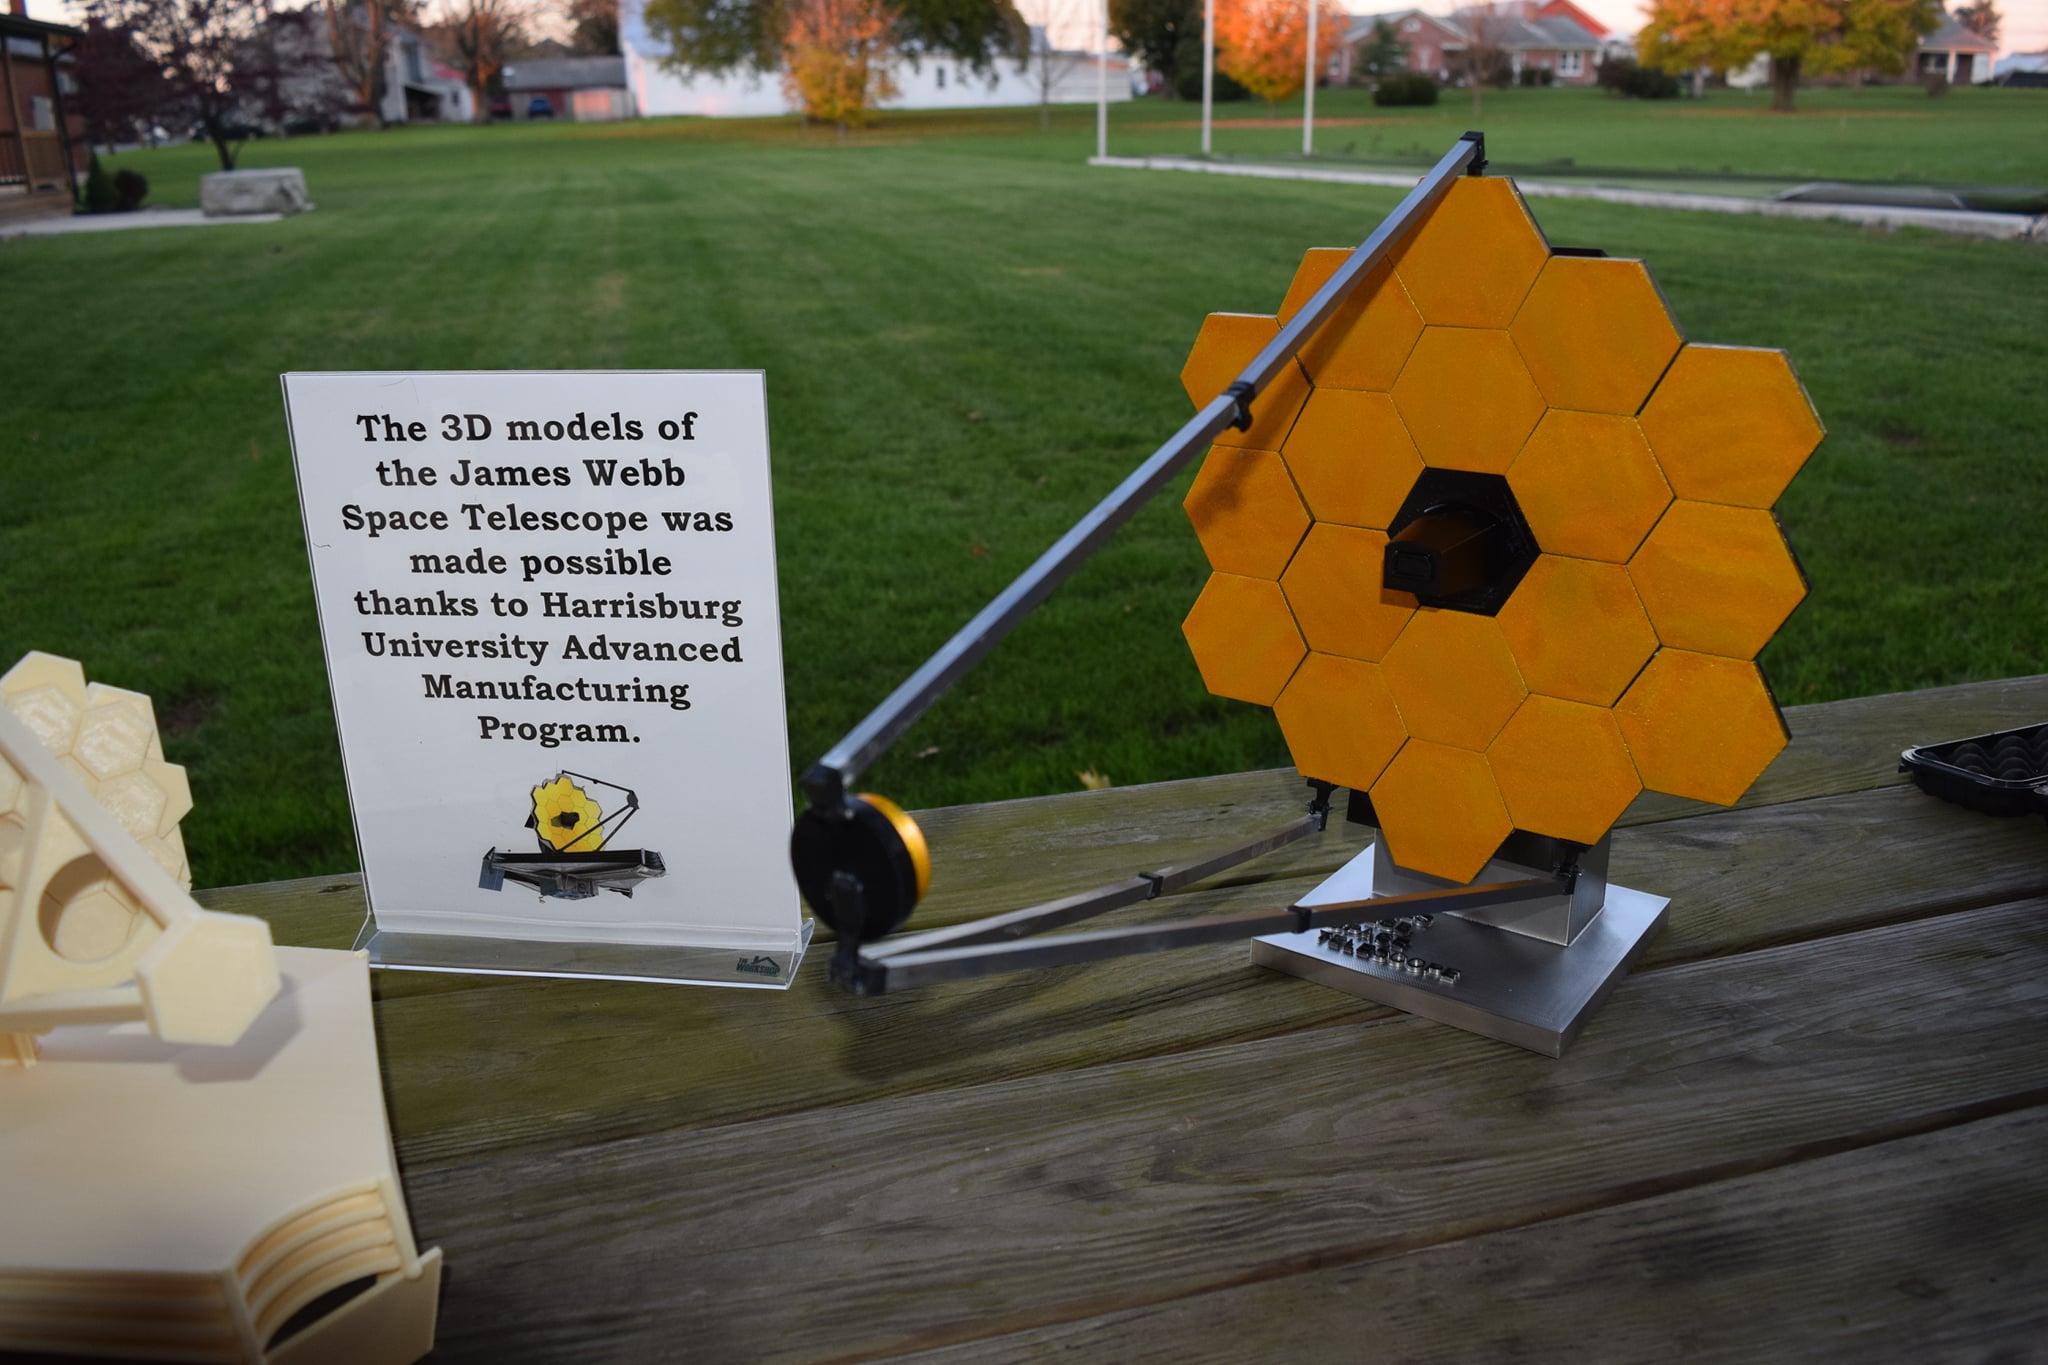 Models of the James Webb Space Telescope printed and assembled for an event at the Lykens Valley Children’s Museum in Elizabethville, PA.